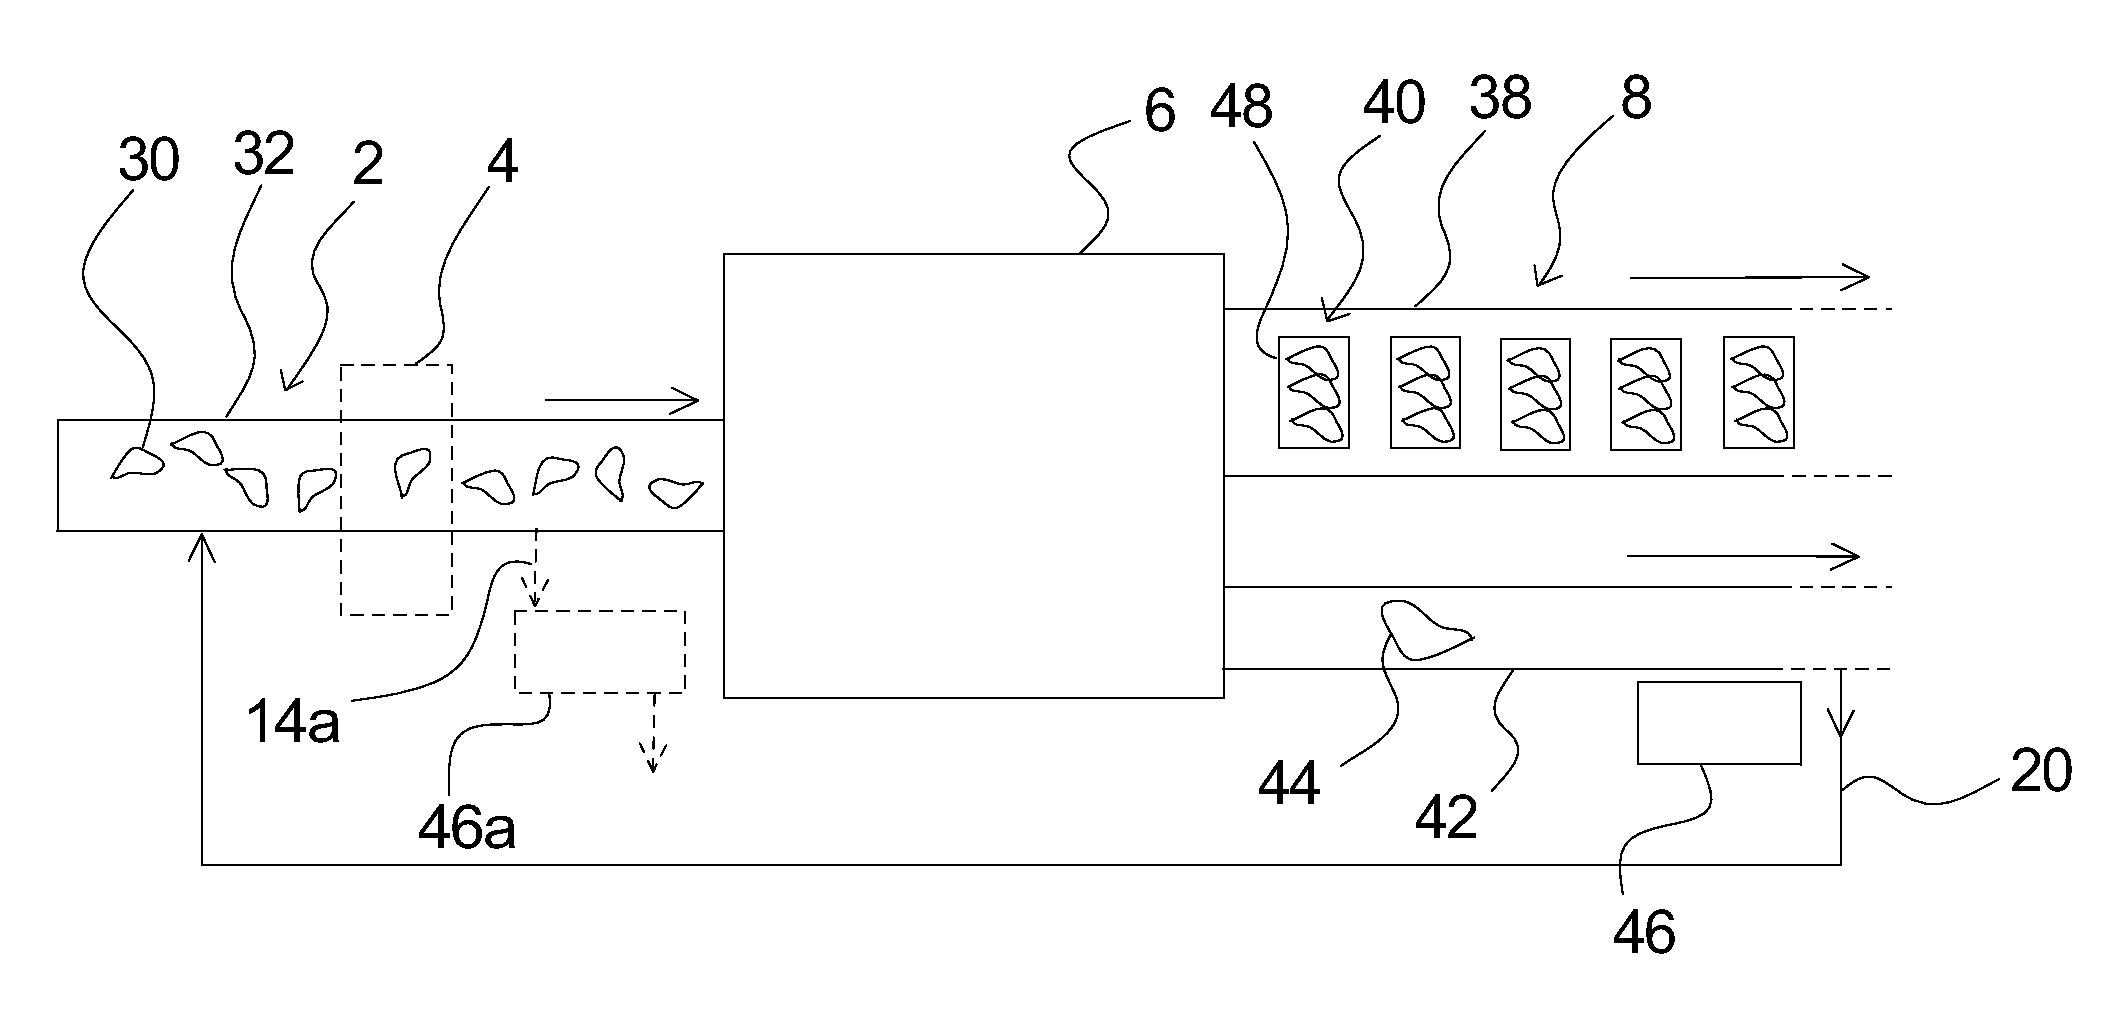 Method and system for processing of food items